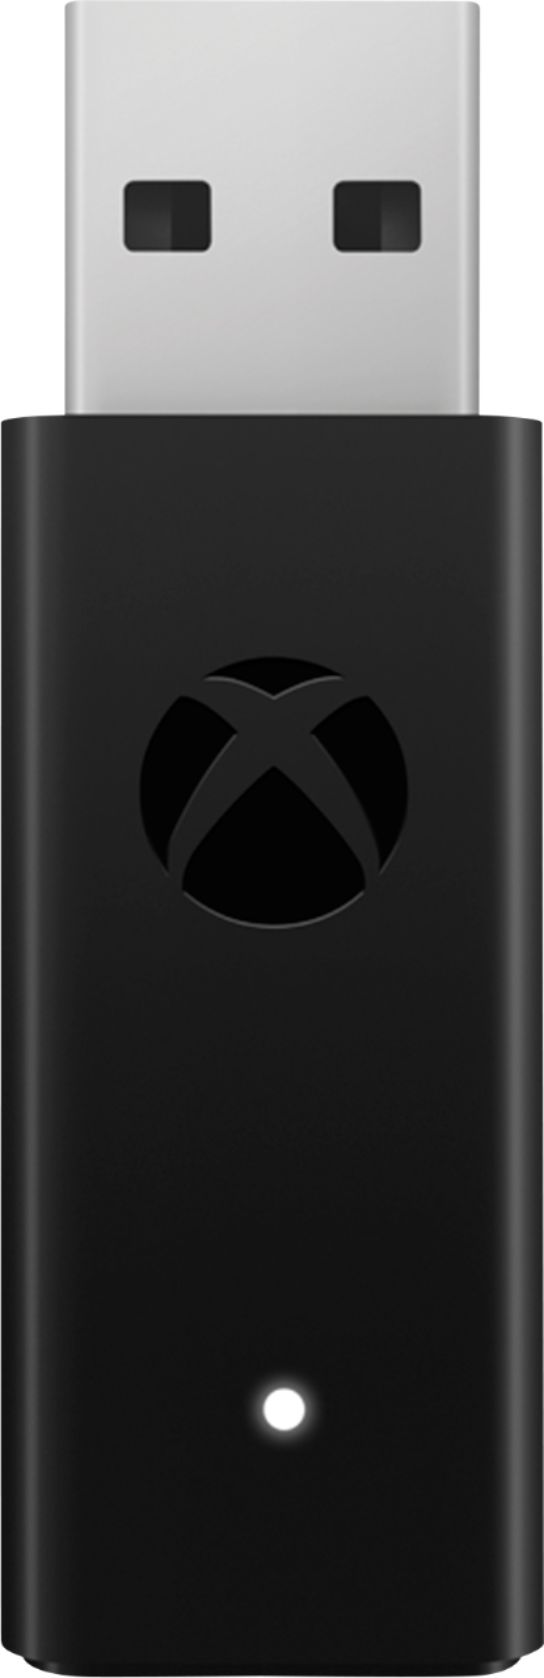 Sociology to justify bulge Microsoft Xbox Wireless Adapter for Windows 10 Black 6HN-00002 - Best Buy